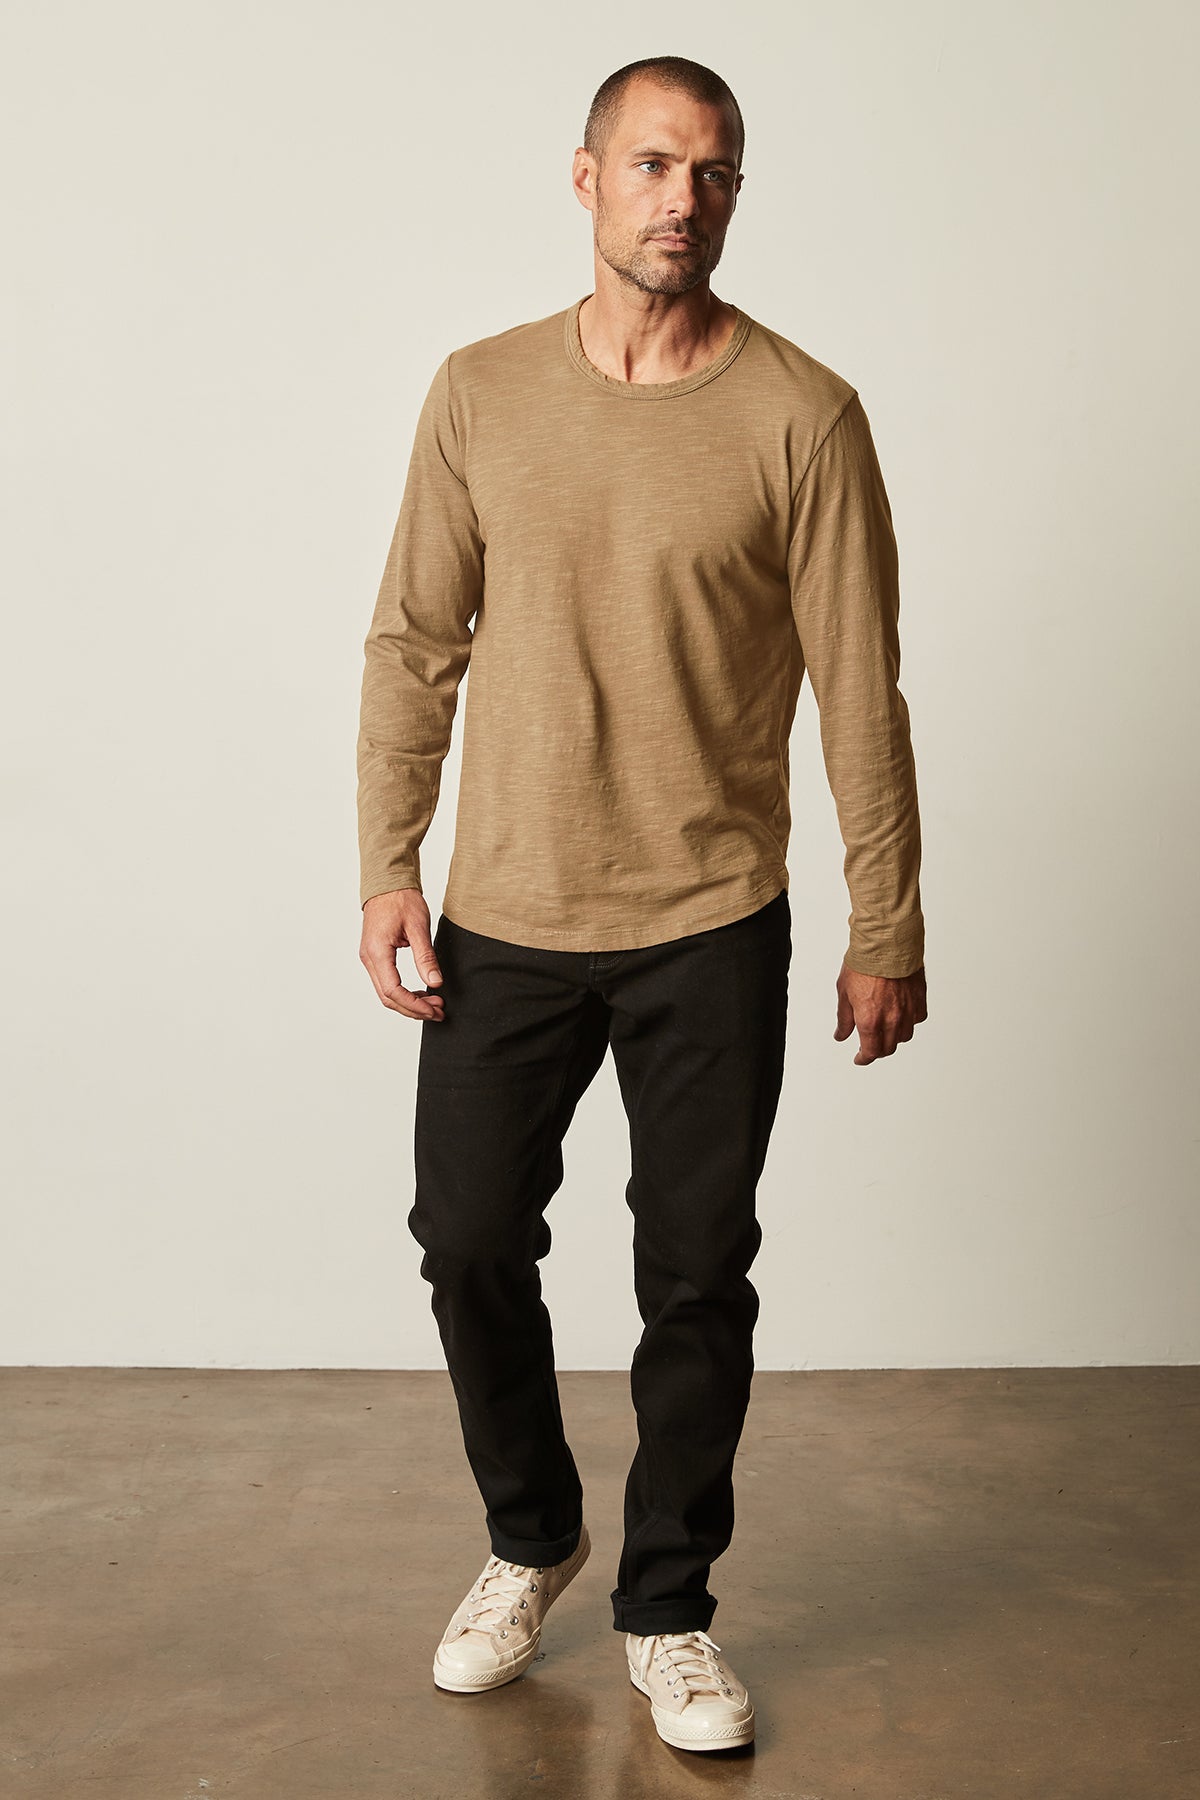 Kai Crew Neck Long Sleeve Tee in camel color with black denim full length front-26630571327681